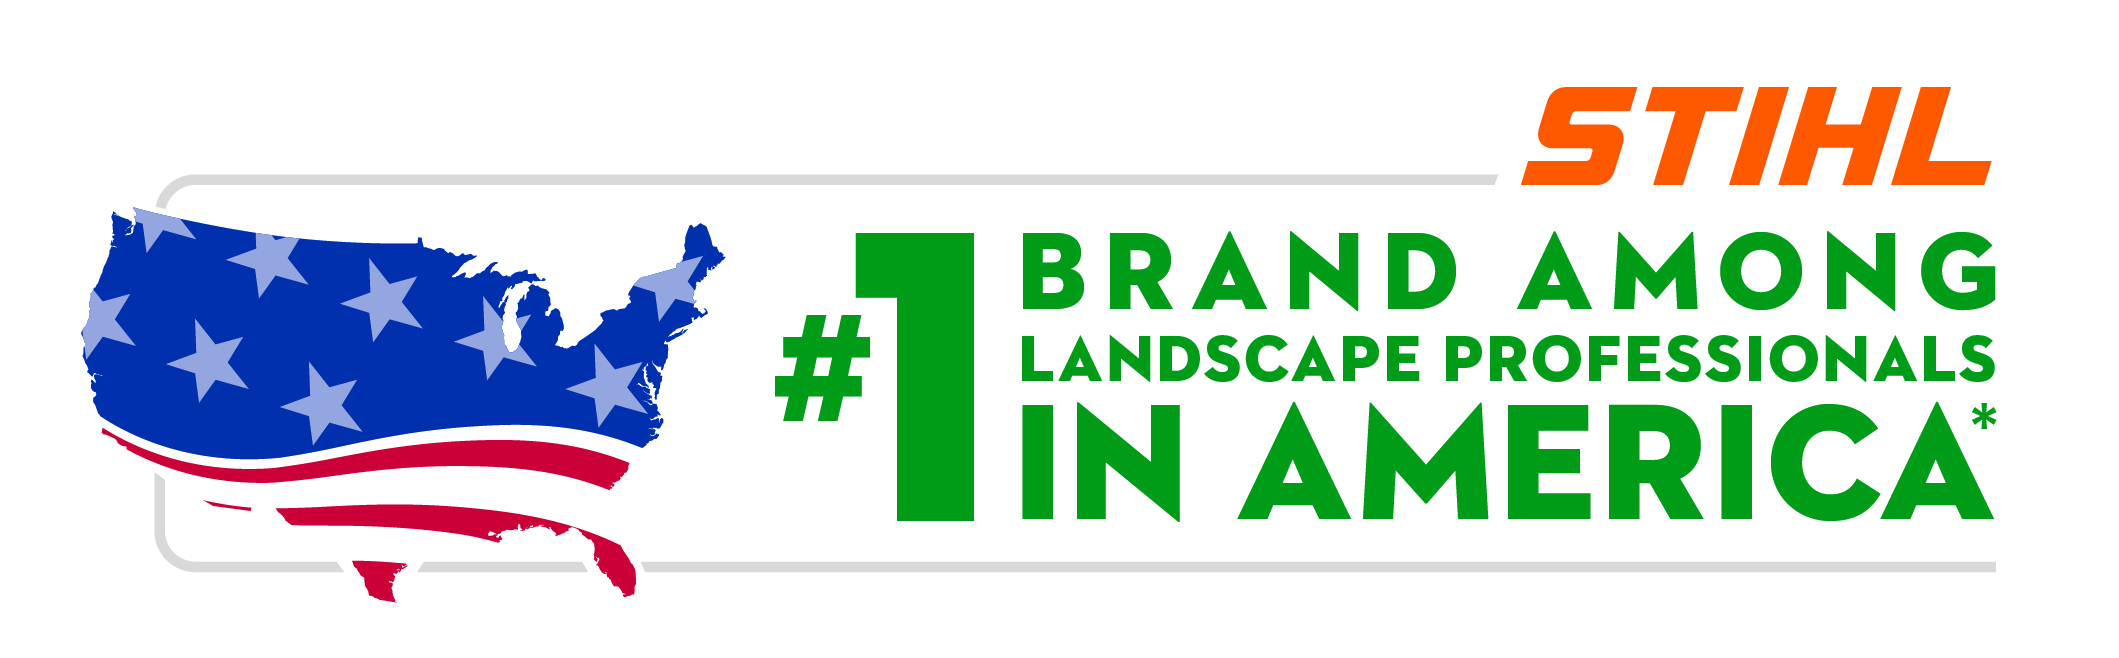 Number one brand among U.S. landscape professionals in America